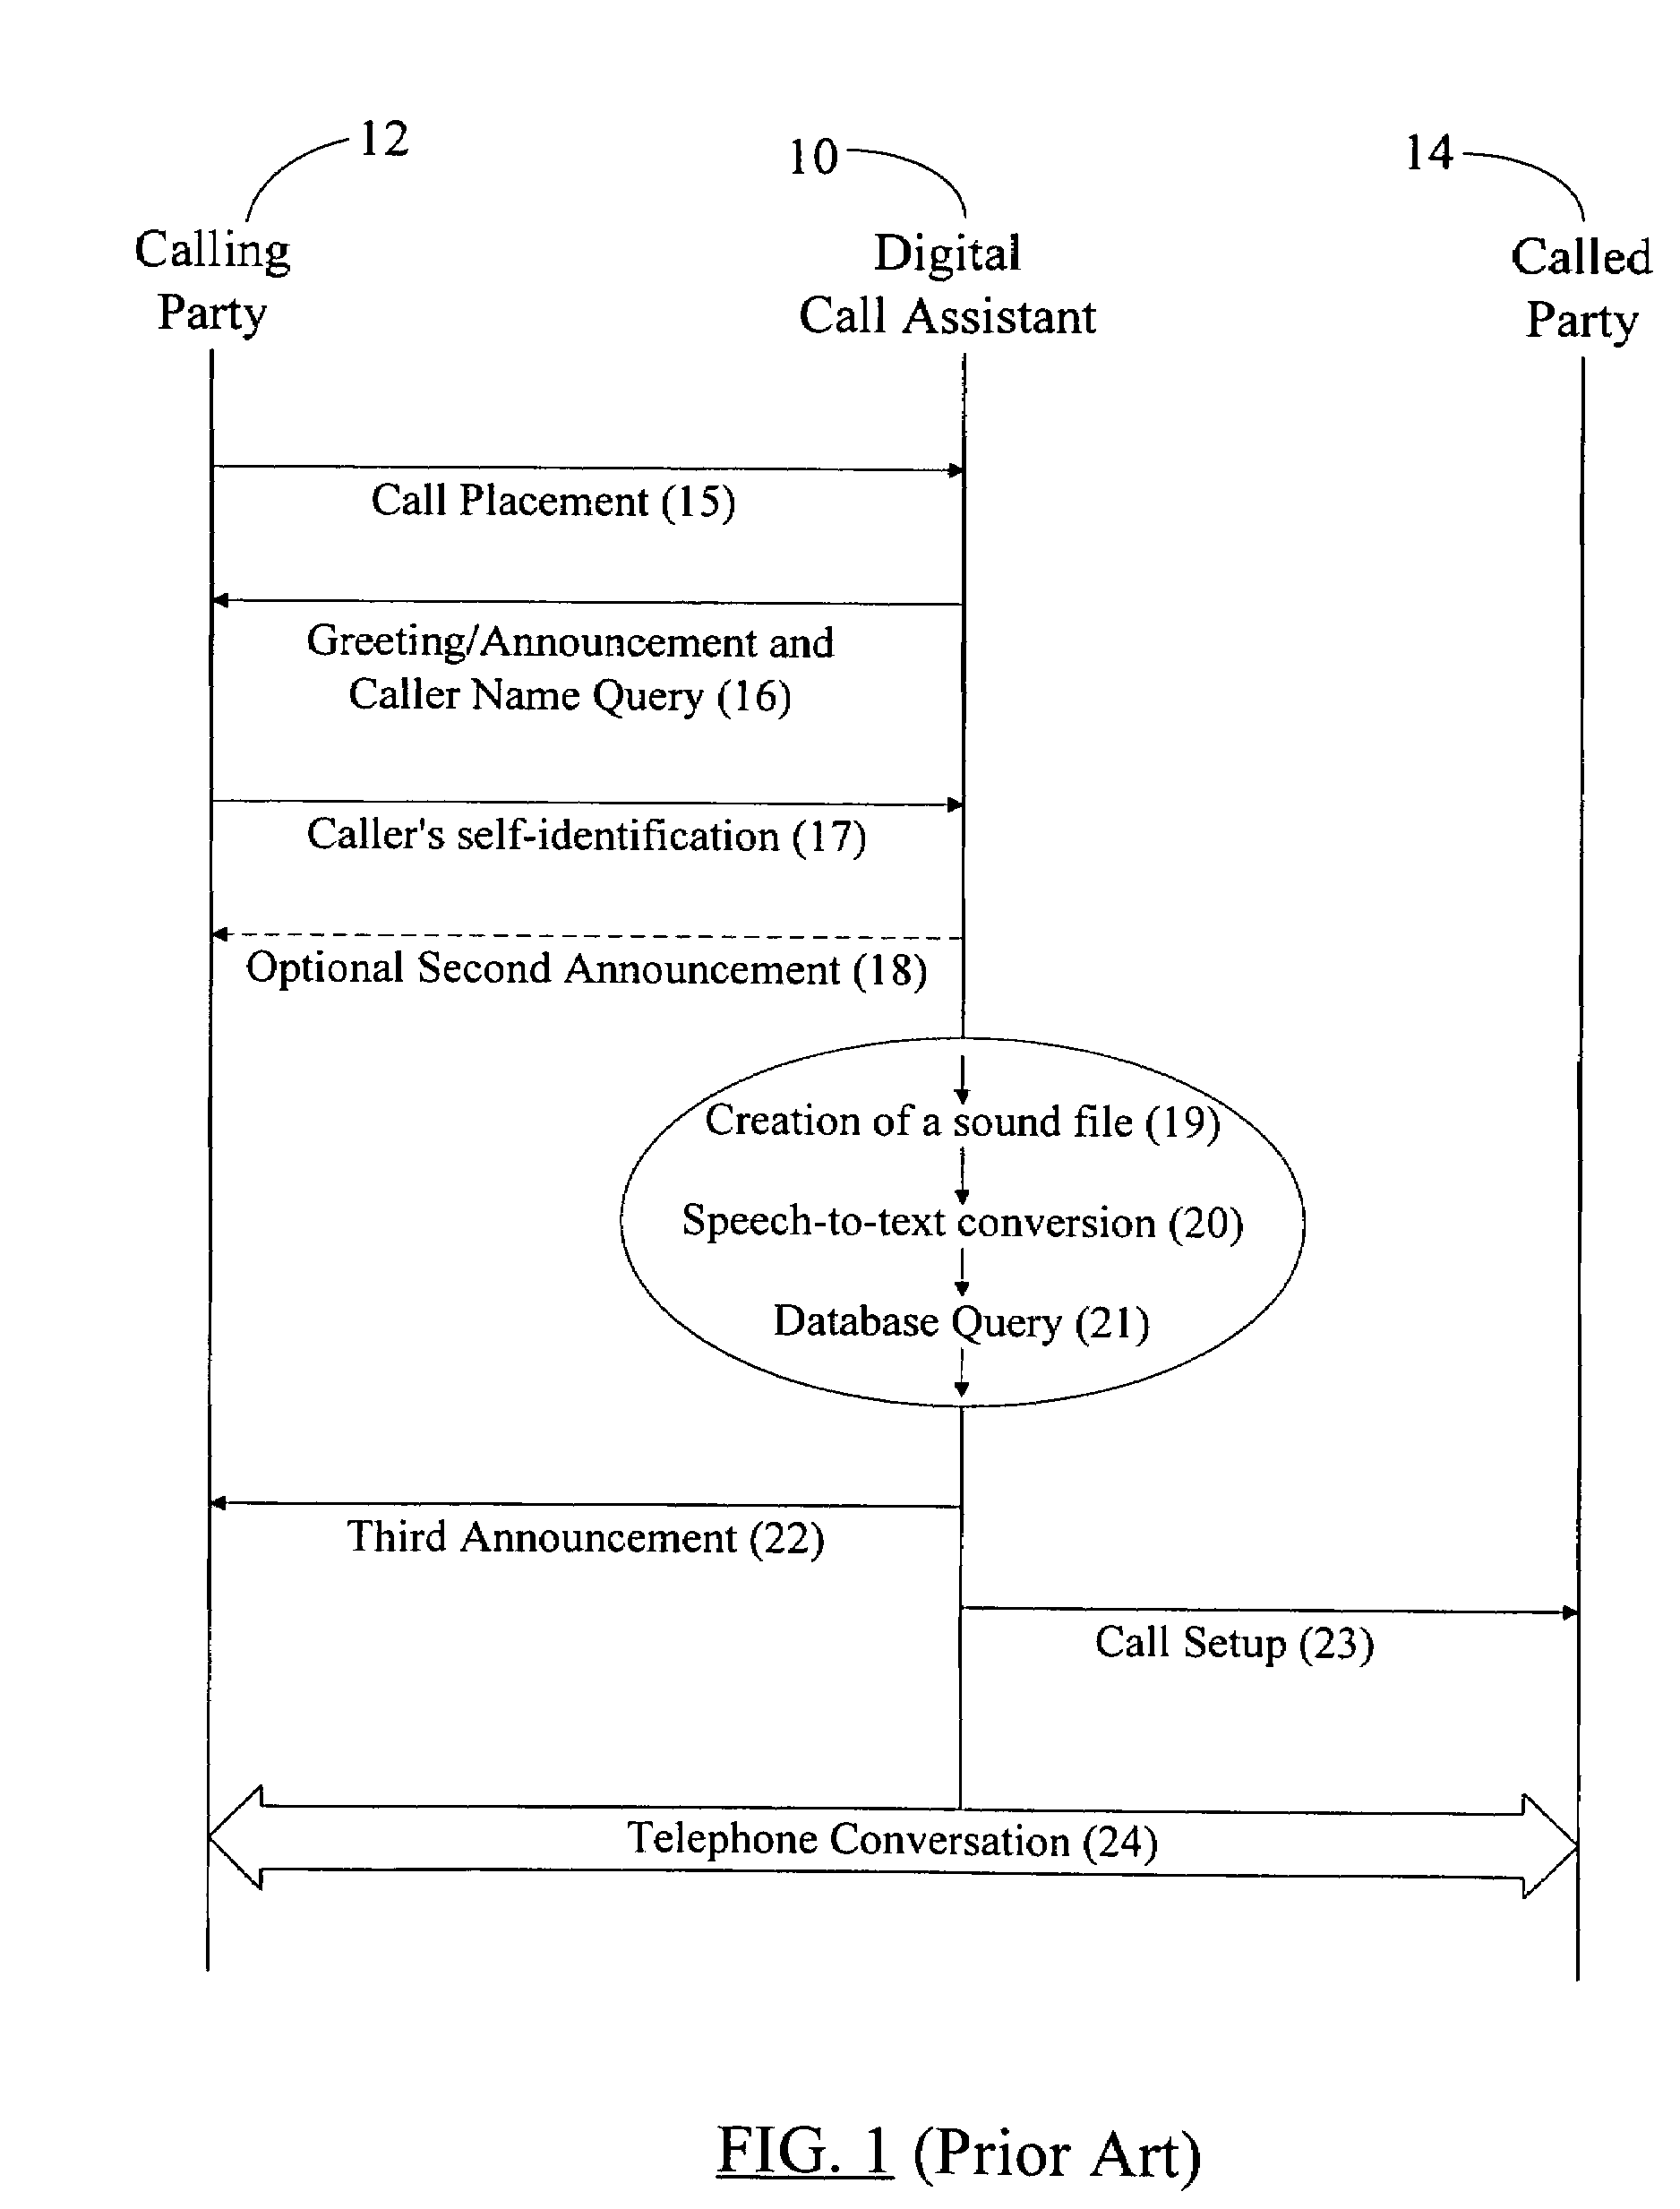 Voice recognition for filtering and announcing message